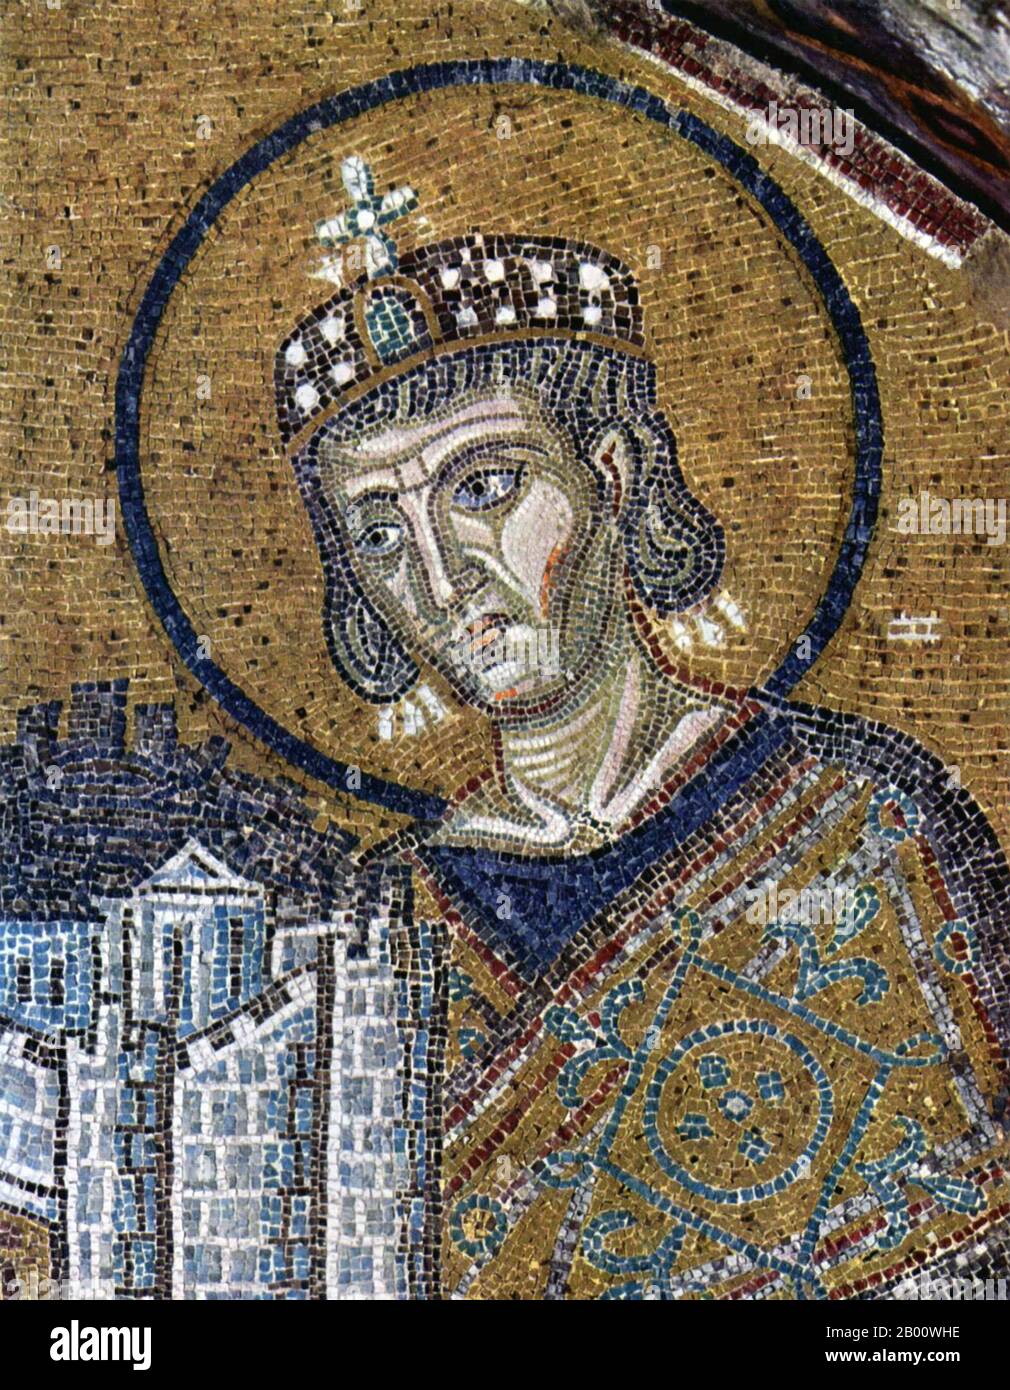 Turkey: Emperor Constantine I with a model of the city of Byzantium. Detail of a mosaic in the Hagia Sophia, c. 1000 CE. Stock Photo